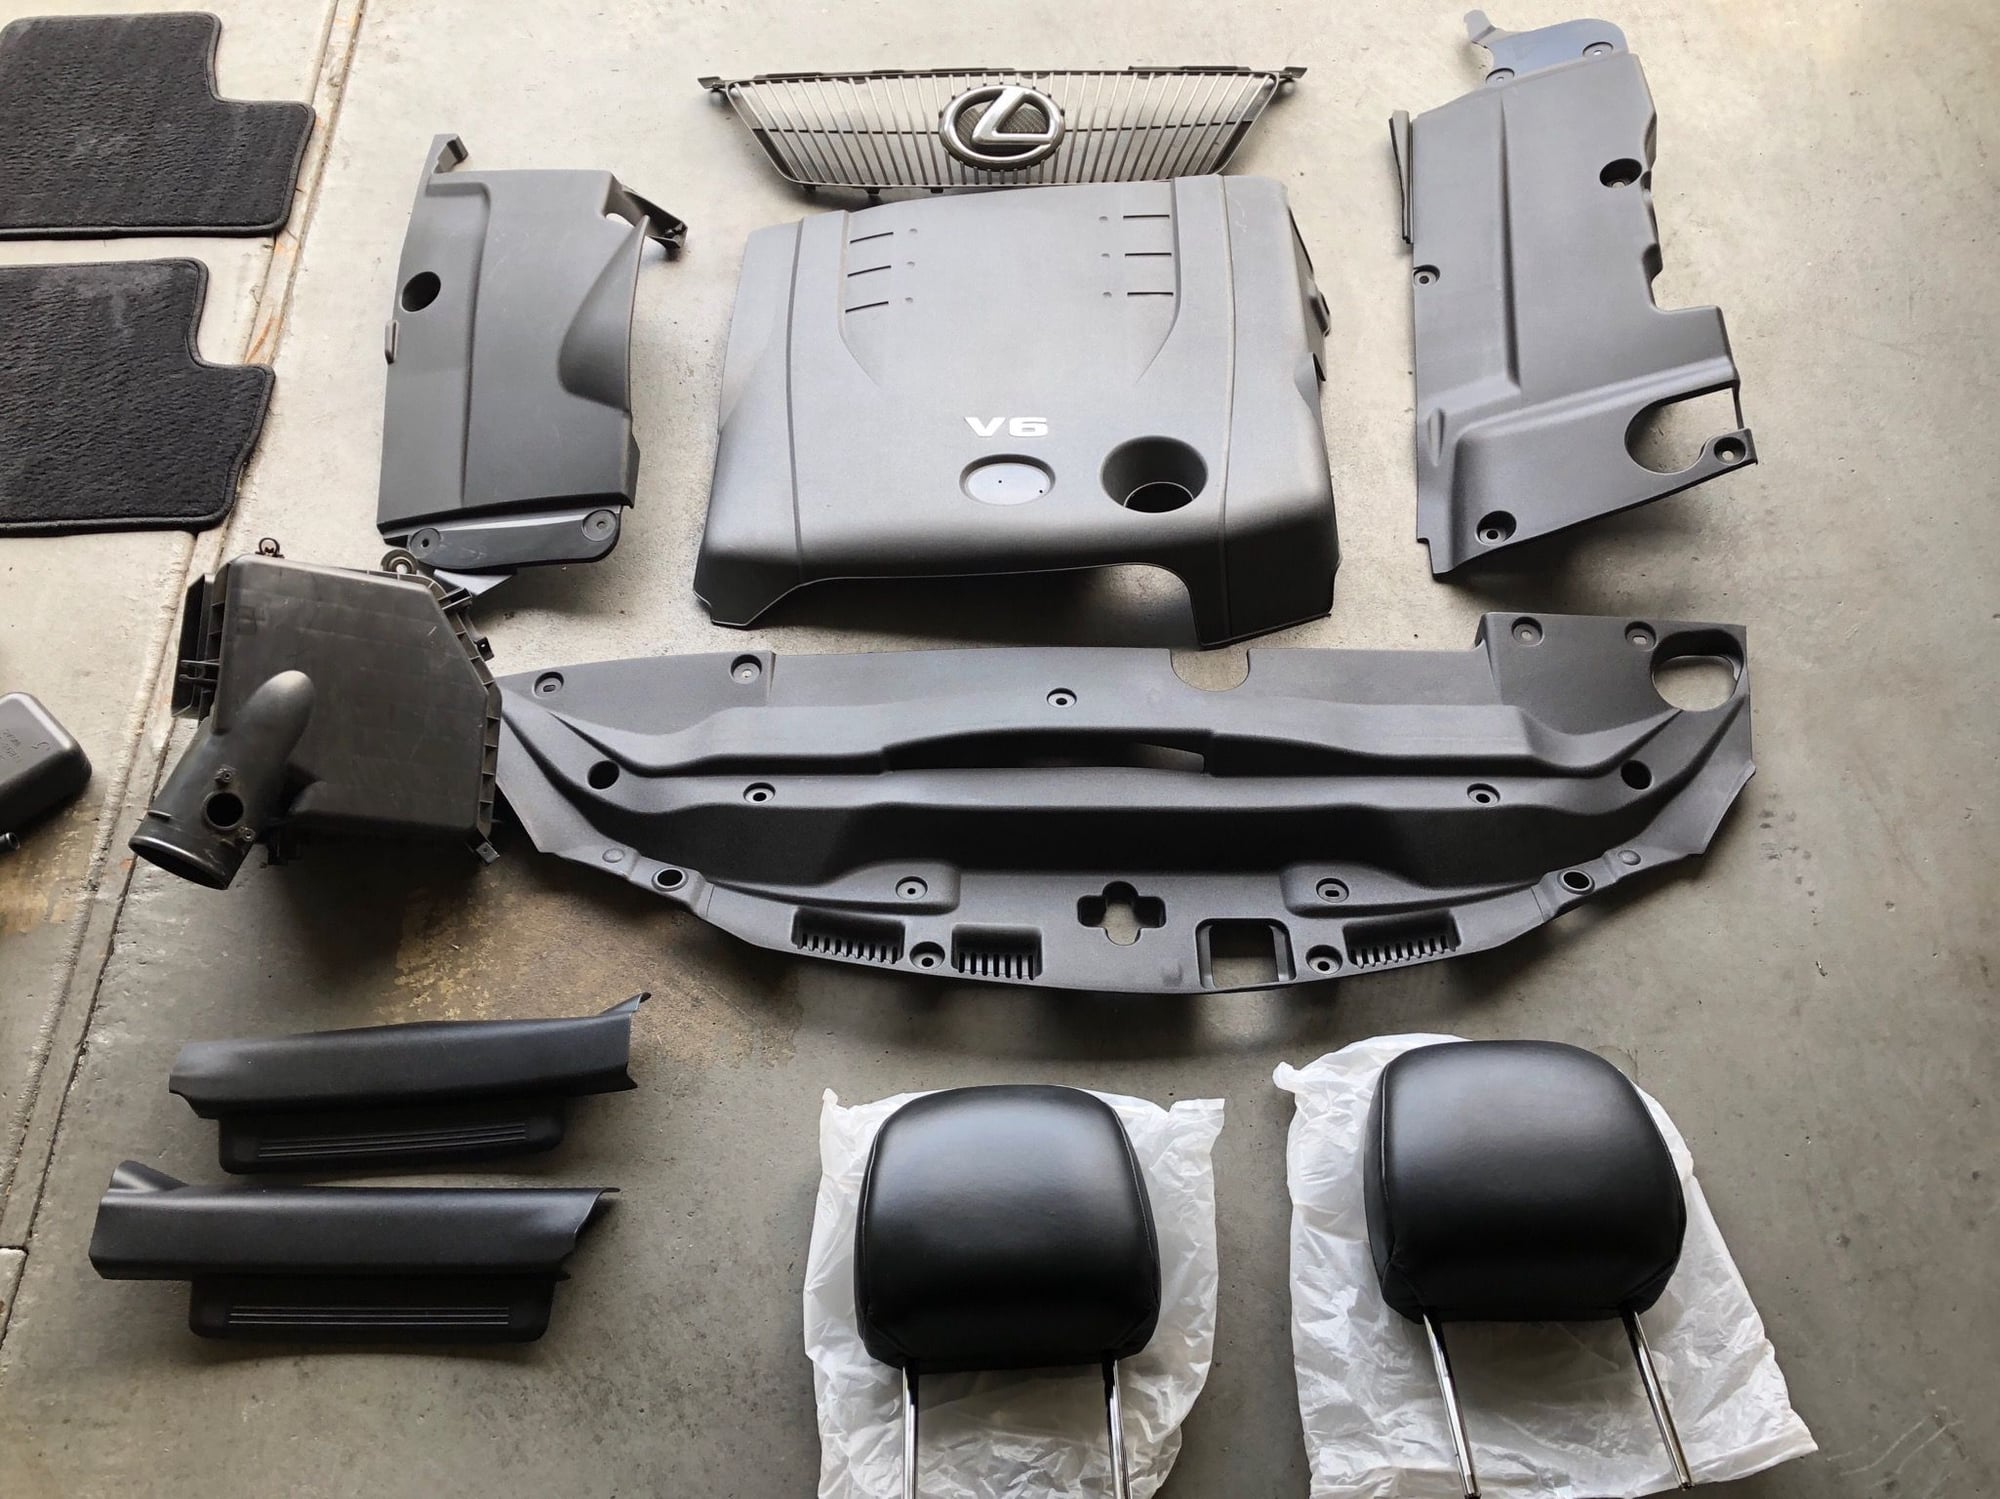 Interior/Upholstery - Many parts from my for SALE! - Used - 2006 to 2013 Lexus IS250 - 2006 to 2013 Lexus IS350 - Vallejo, CA 94591, United States